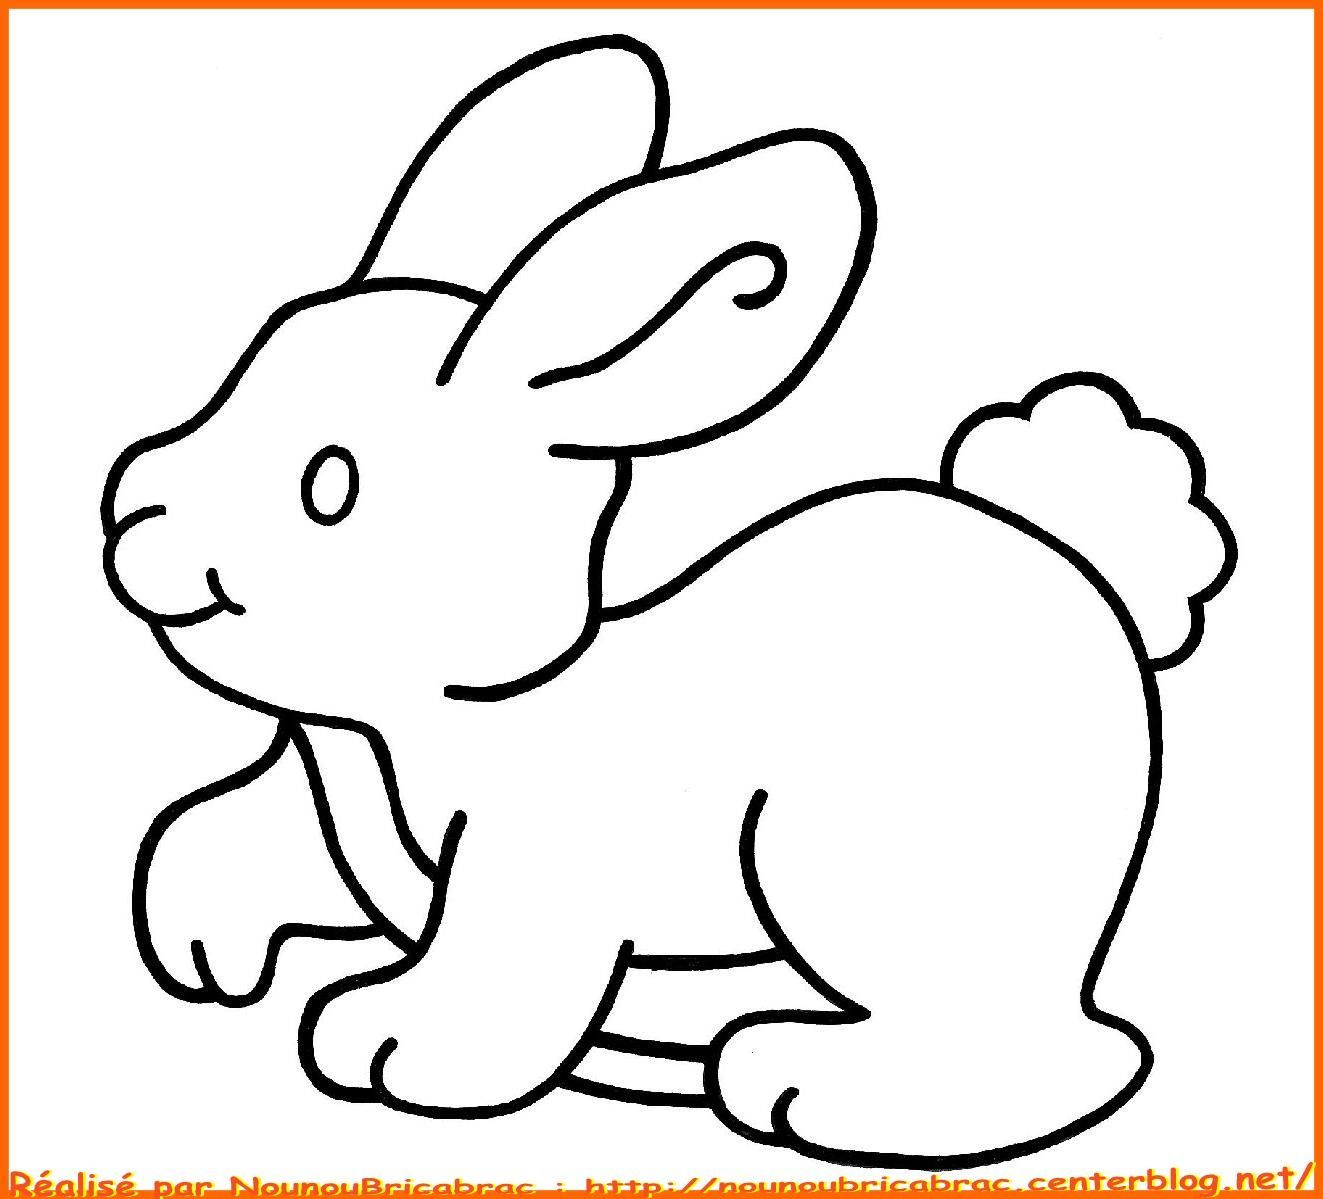 Coloriages Animaux - Page 3 über Coloriage Dessin Lapin